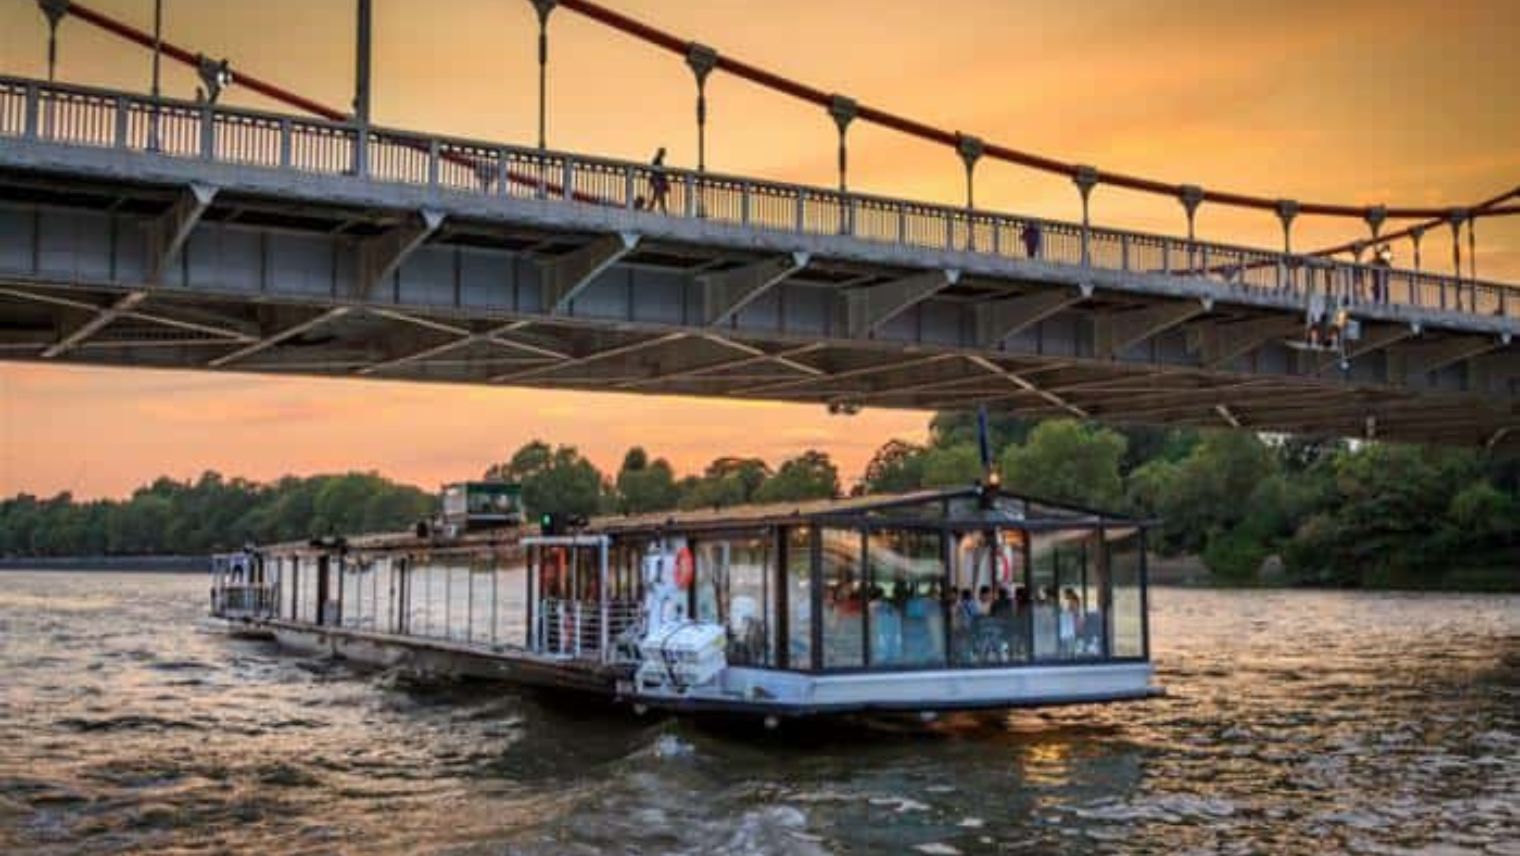 Bateaux dining cruise on the River Thames London